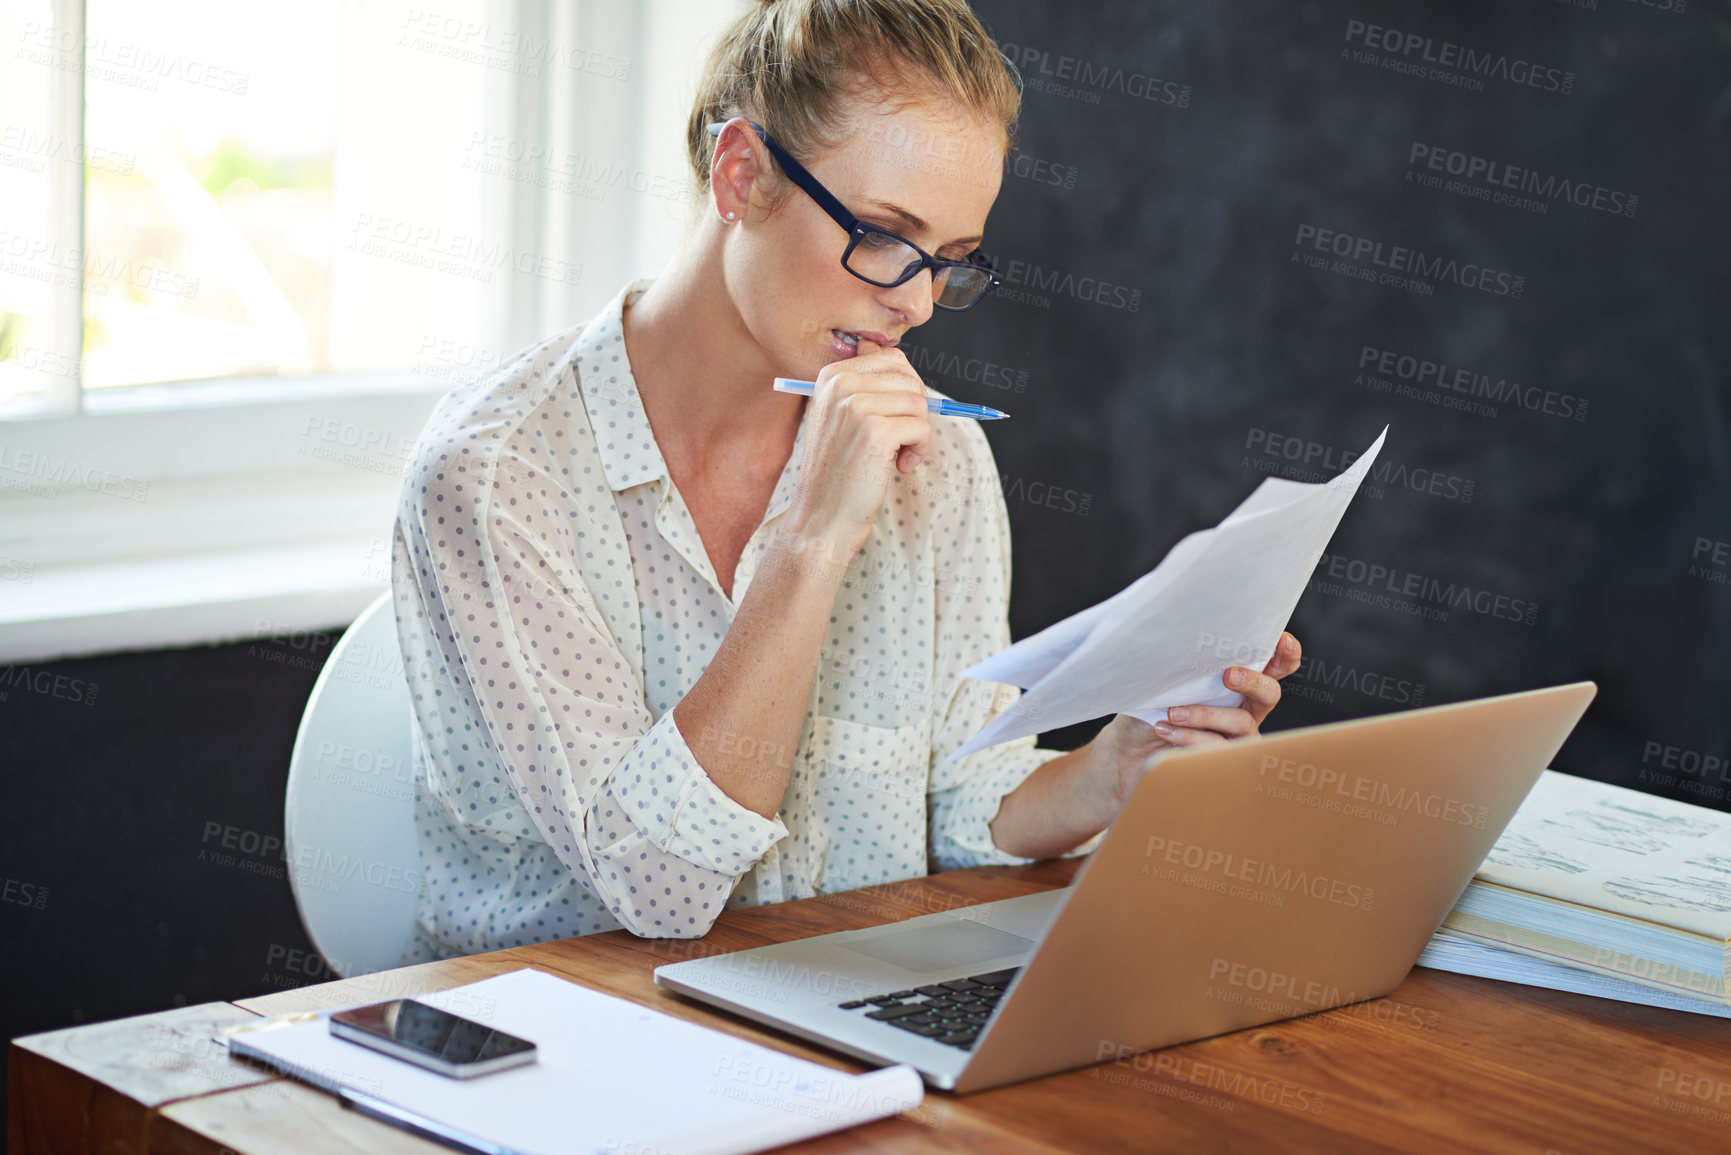 Buy stock photo Shot of a young woman working from home